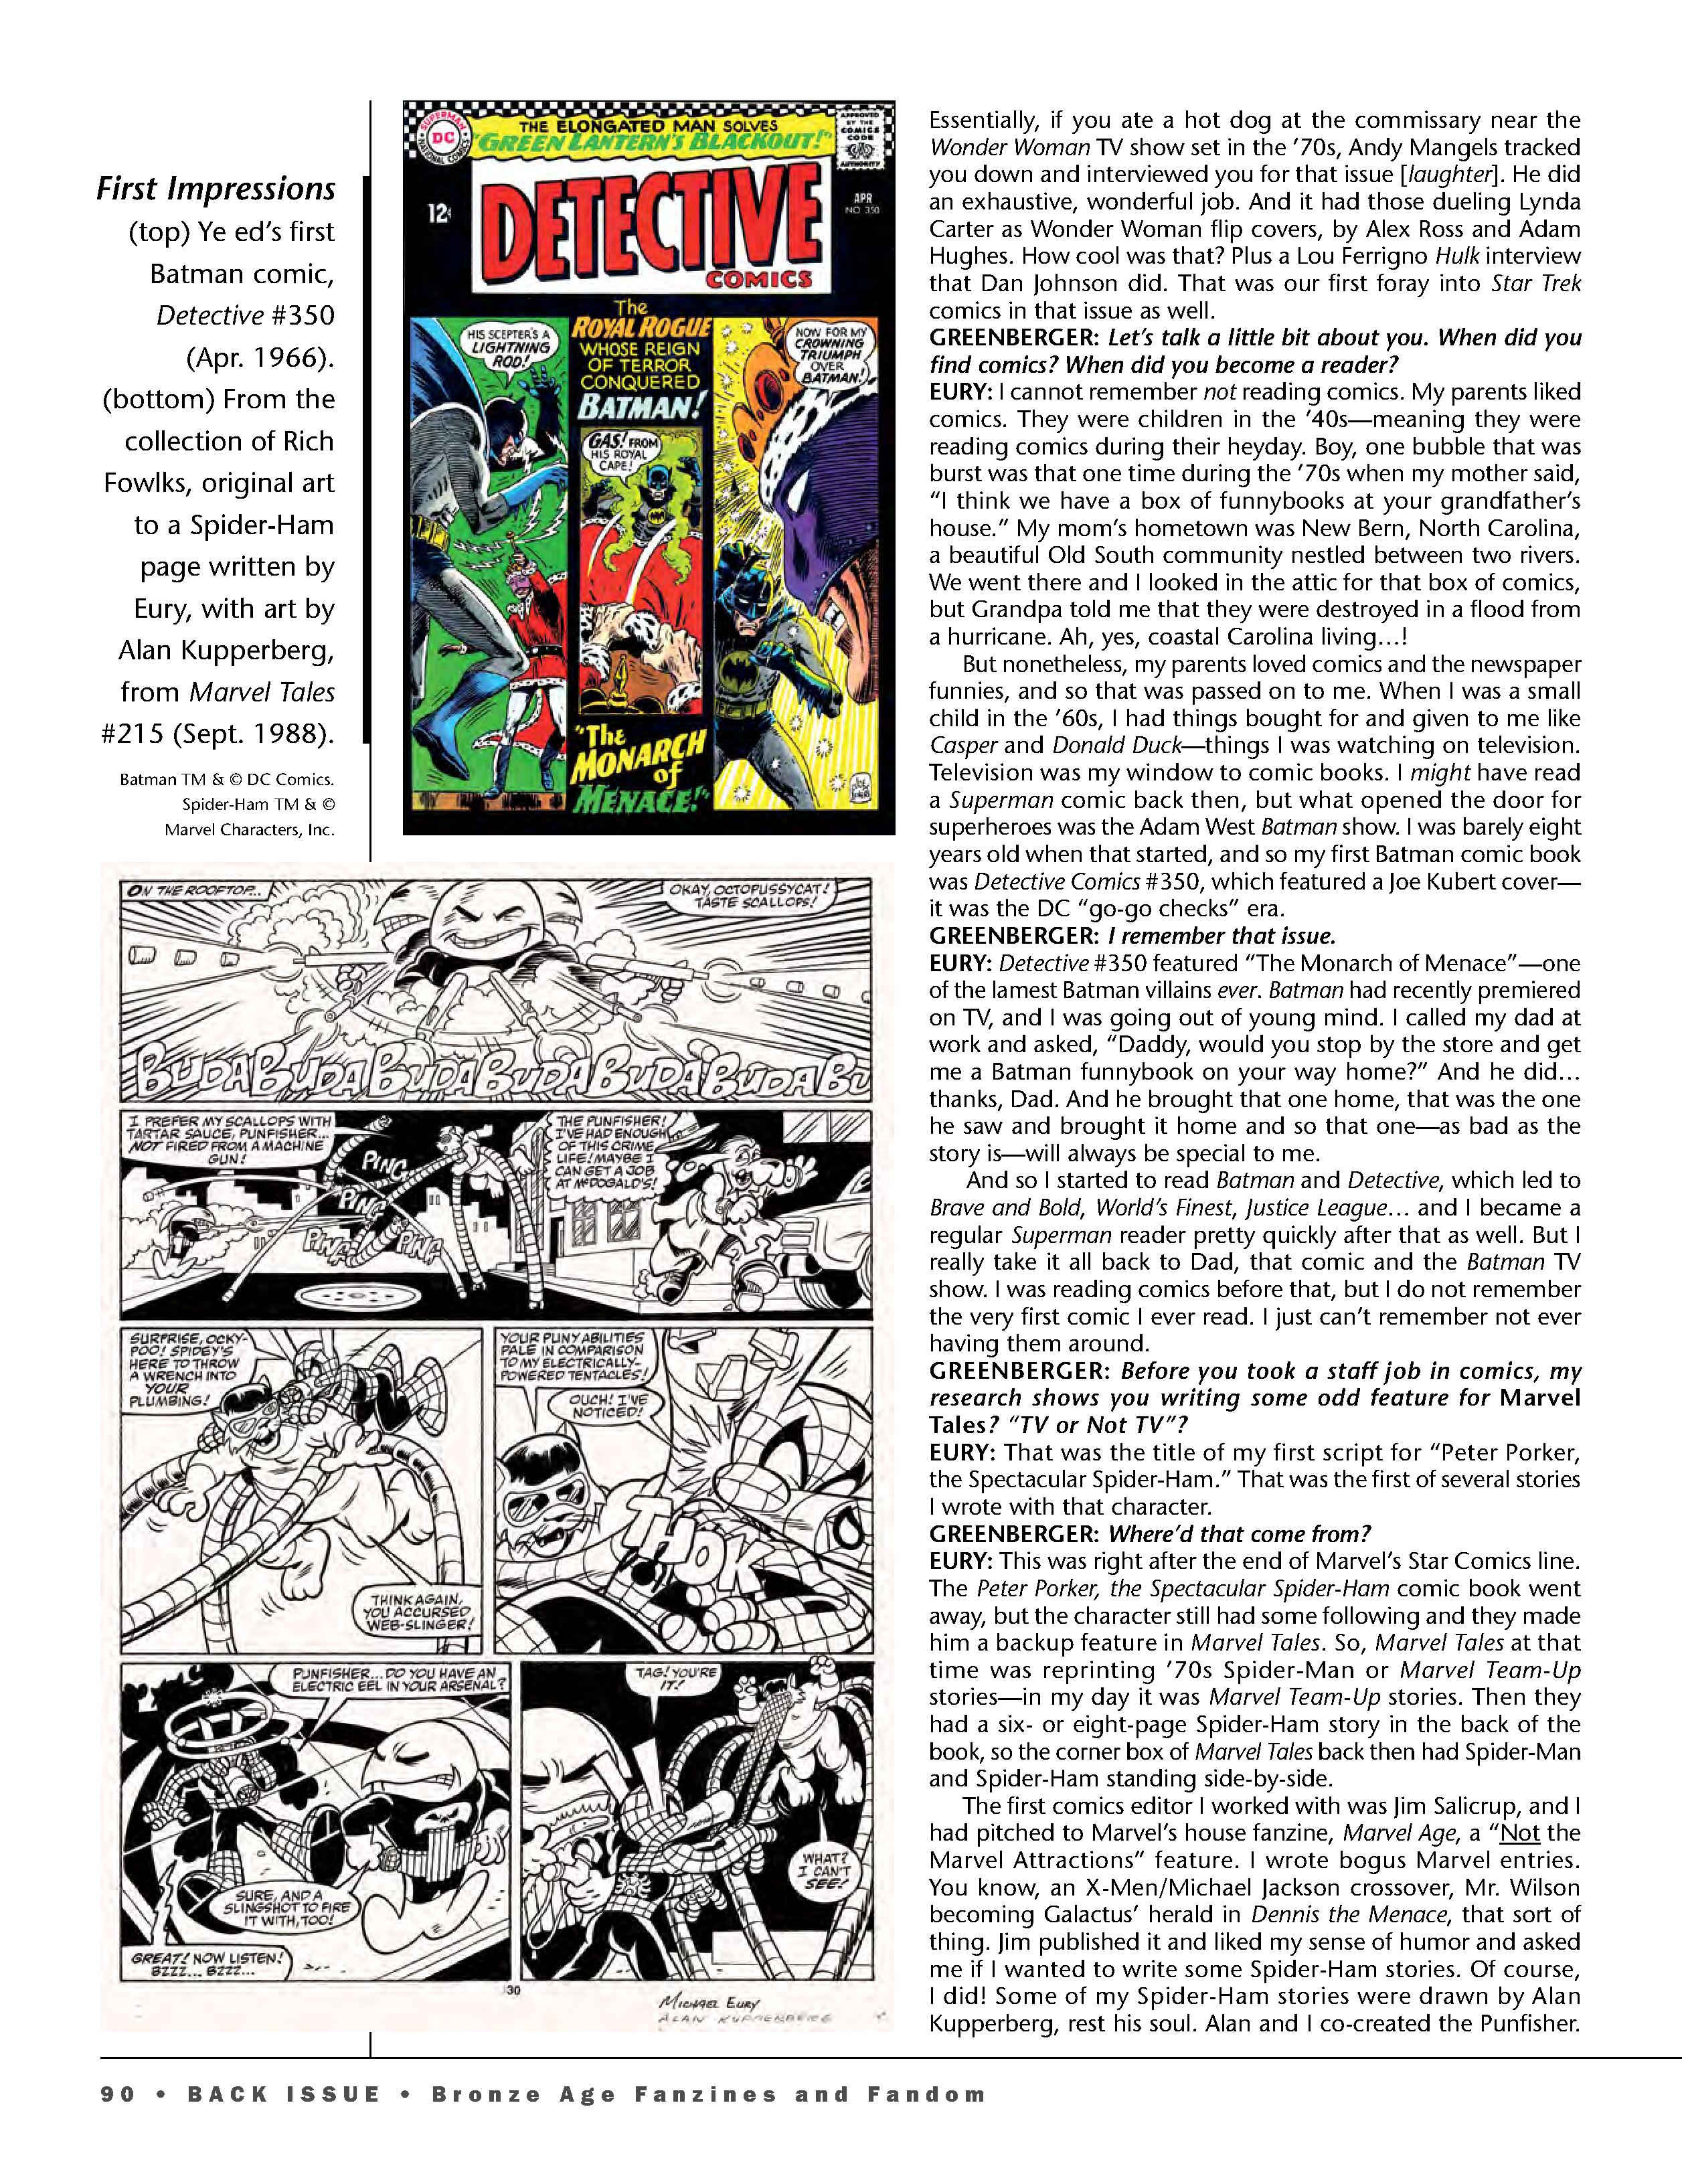 Read online Back Issue comic -  Issue #100 - 92